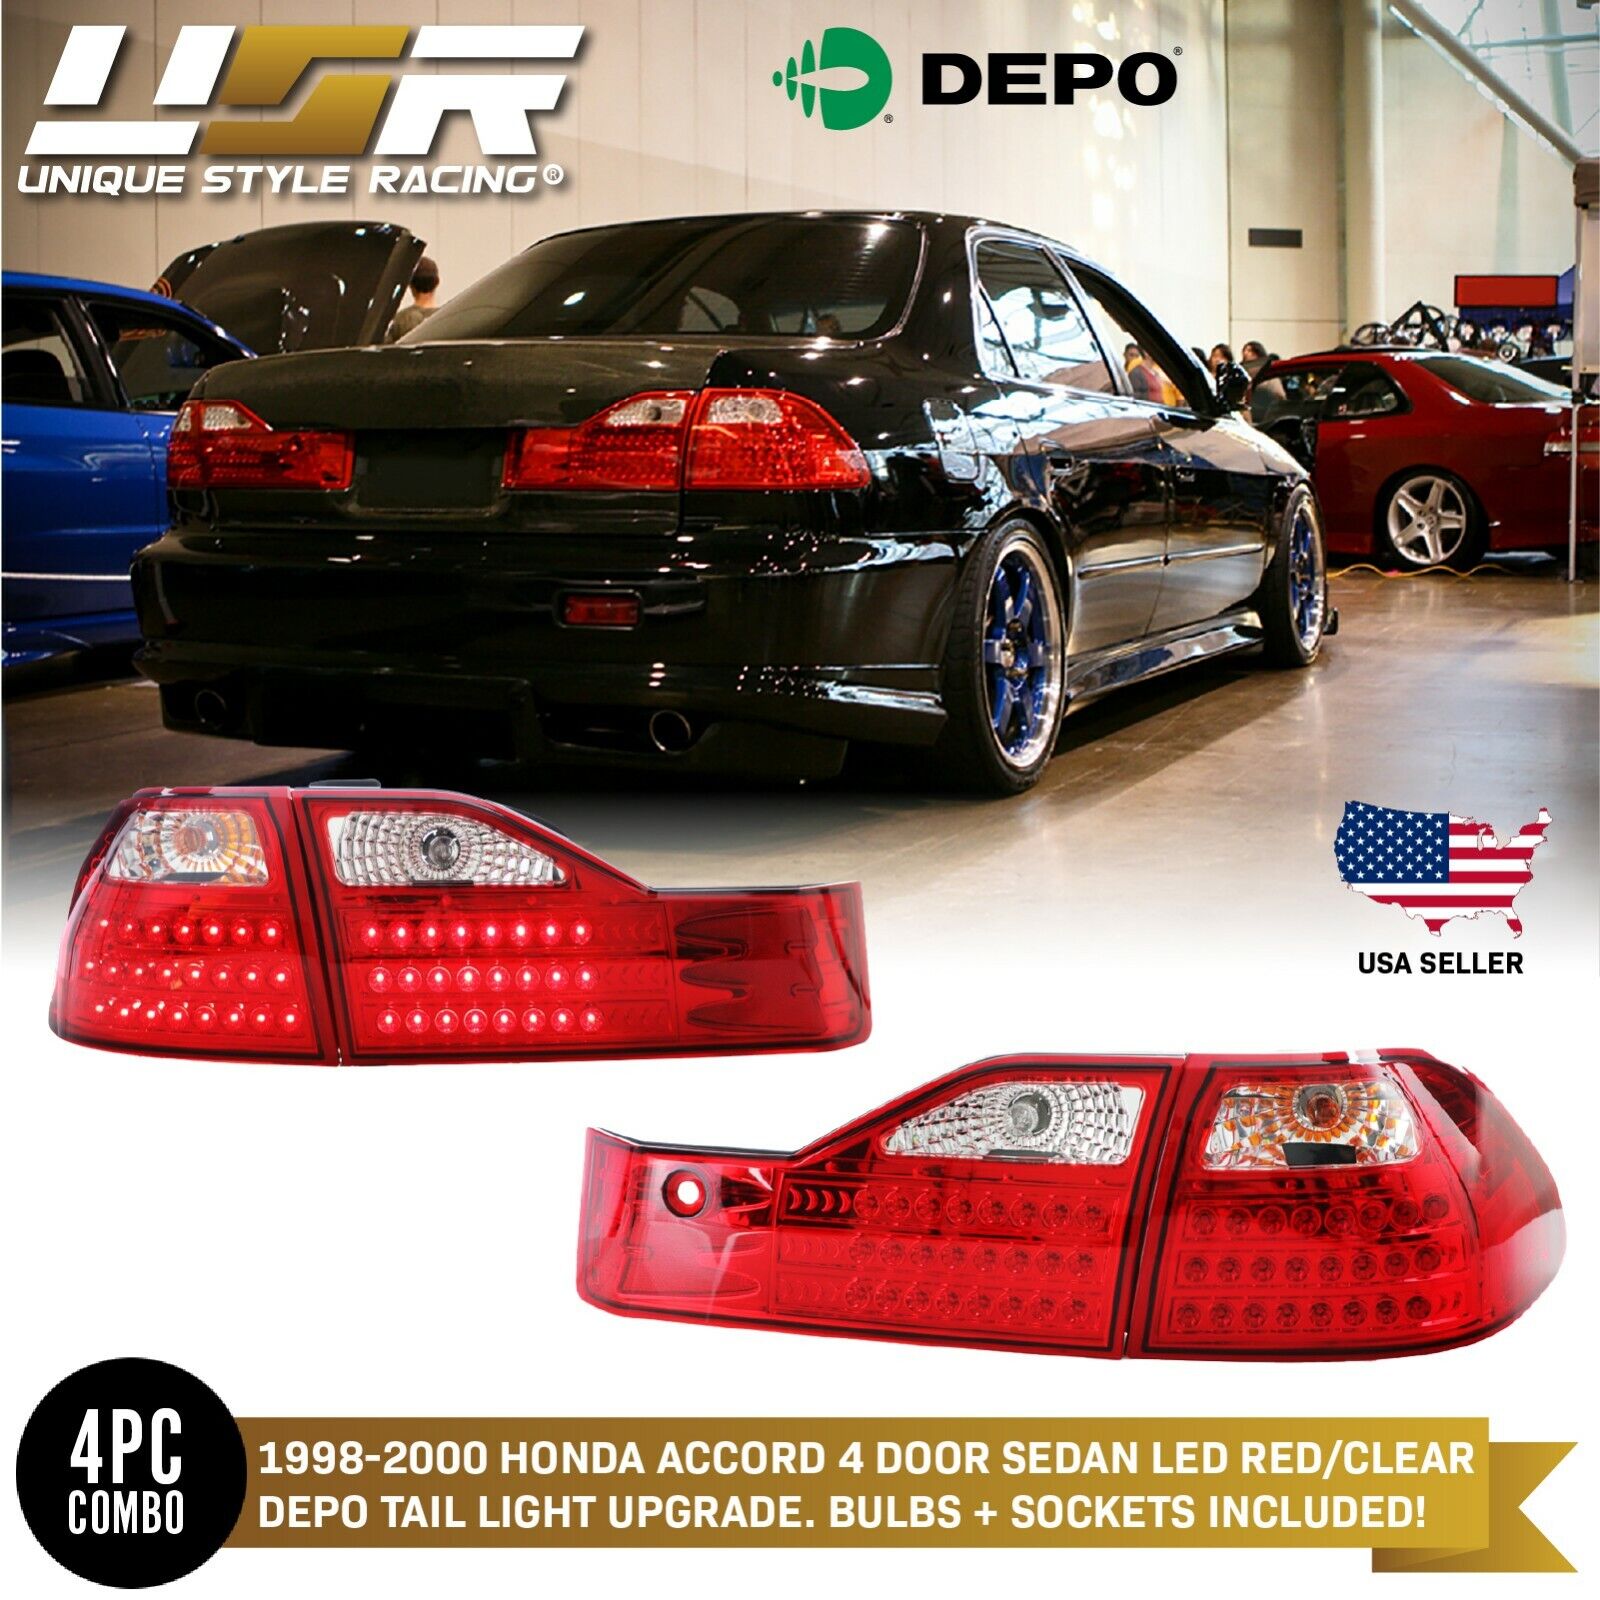 DEPO JDM Style Red/Clear LED Tail Lights For 1998-2000 Honda Accord 4 Door Sedan